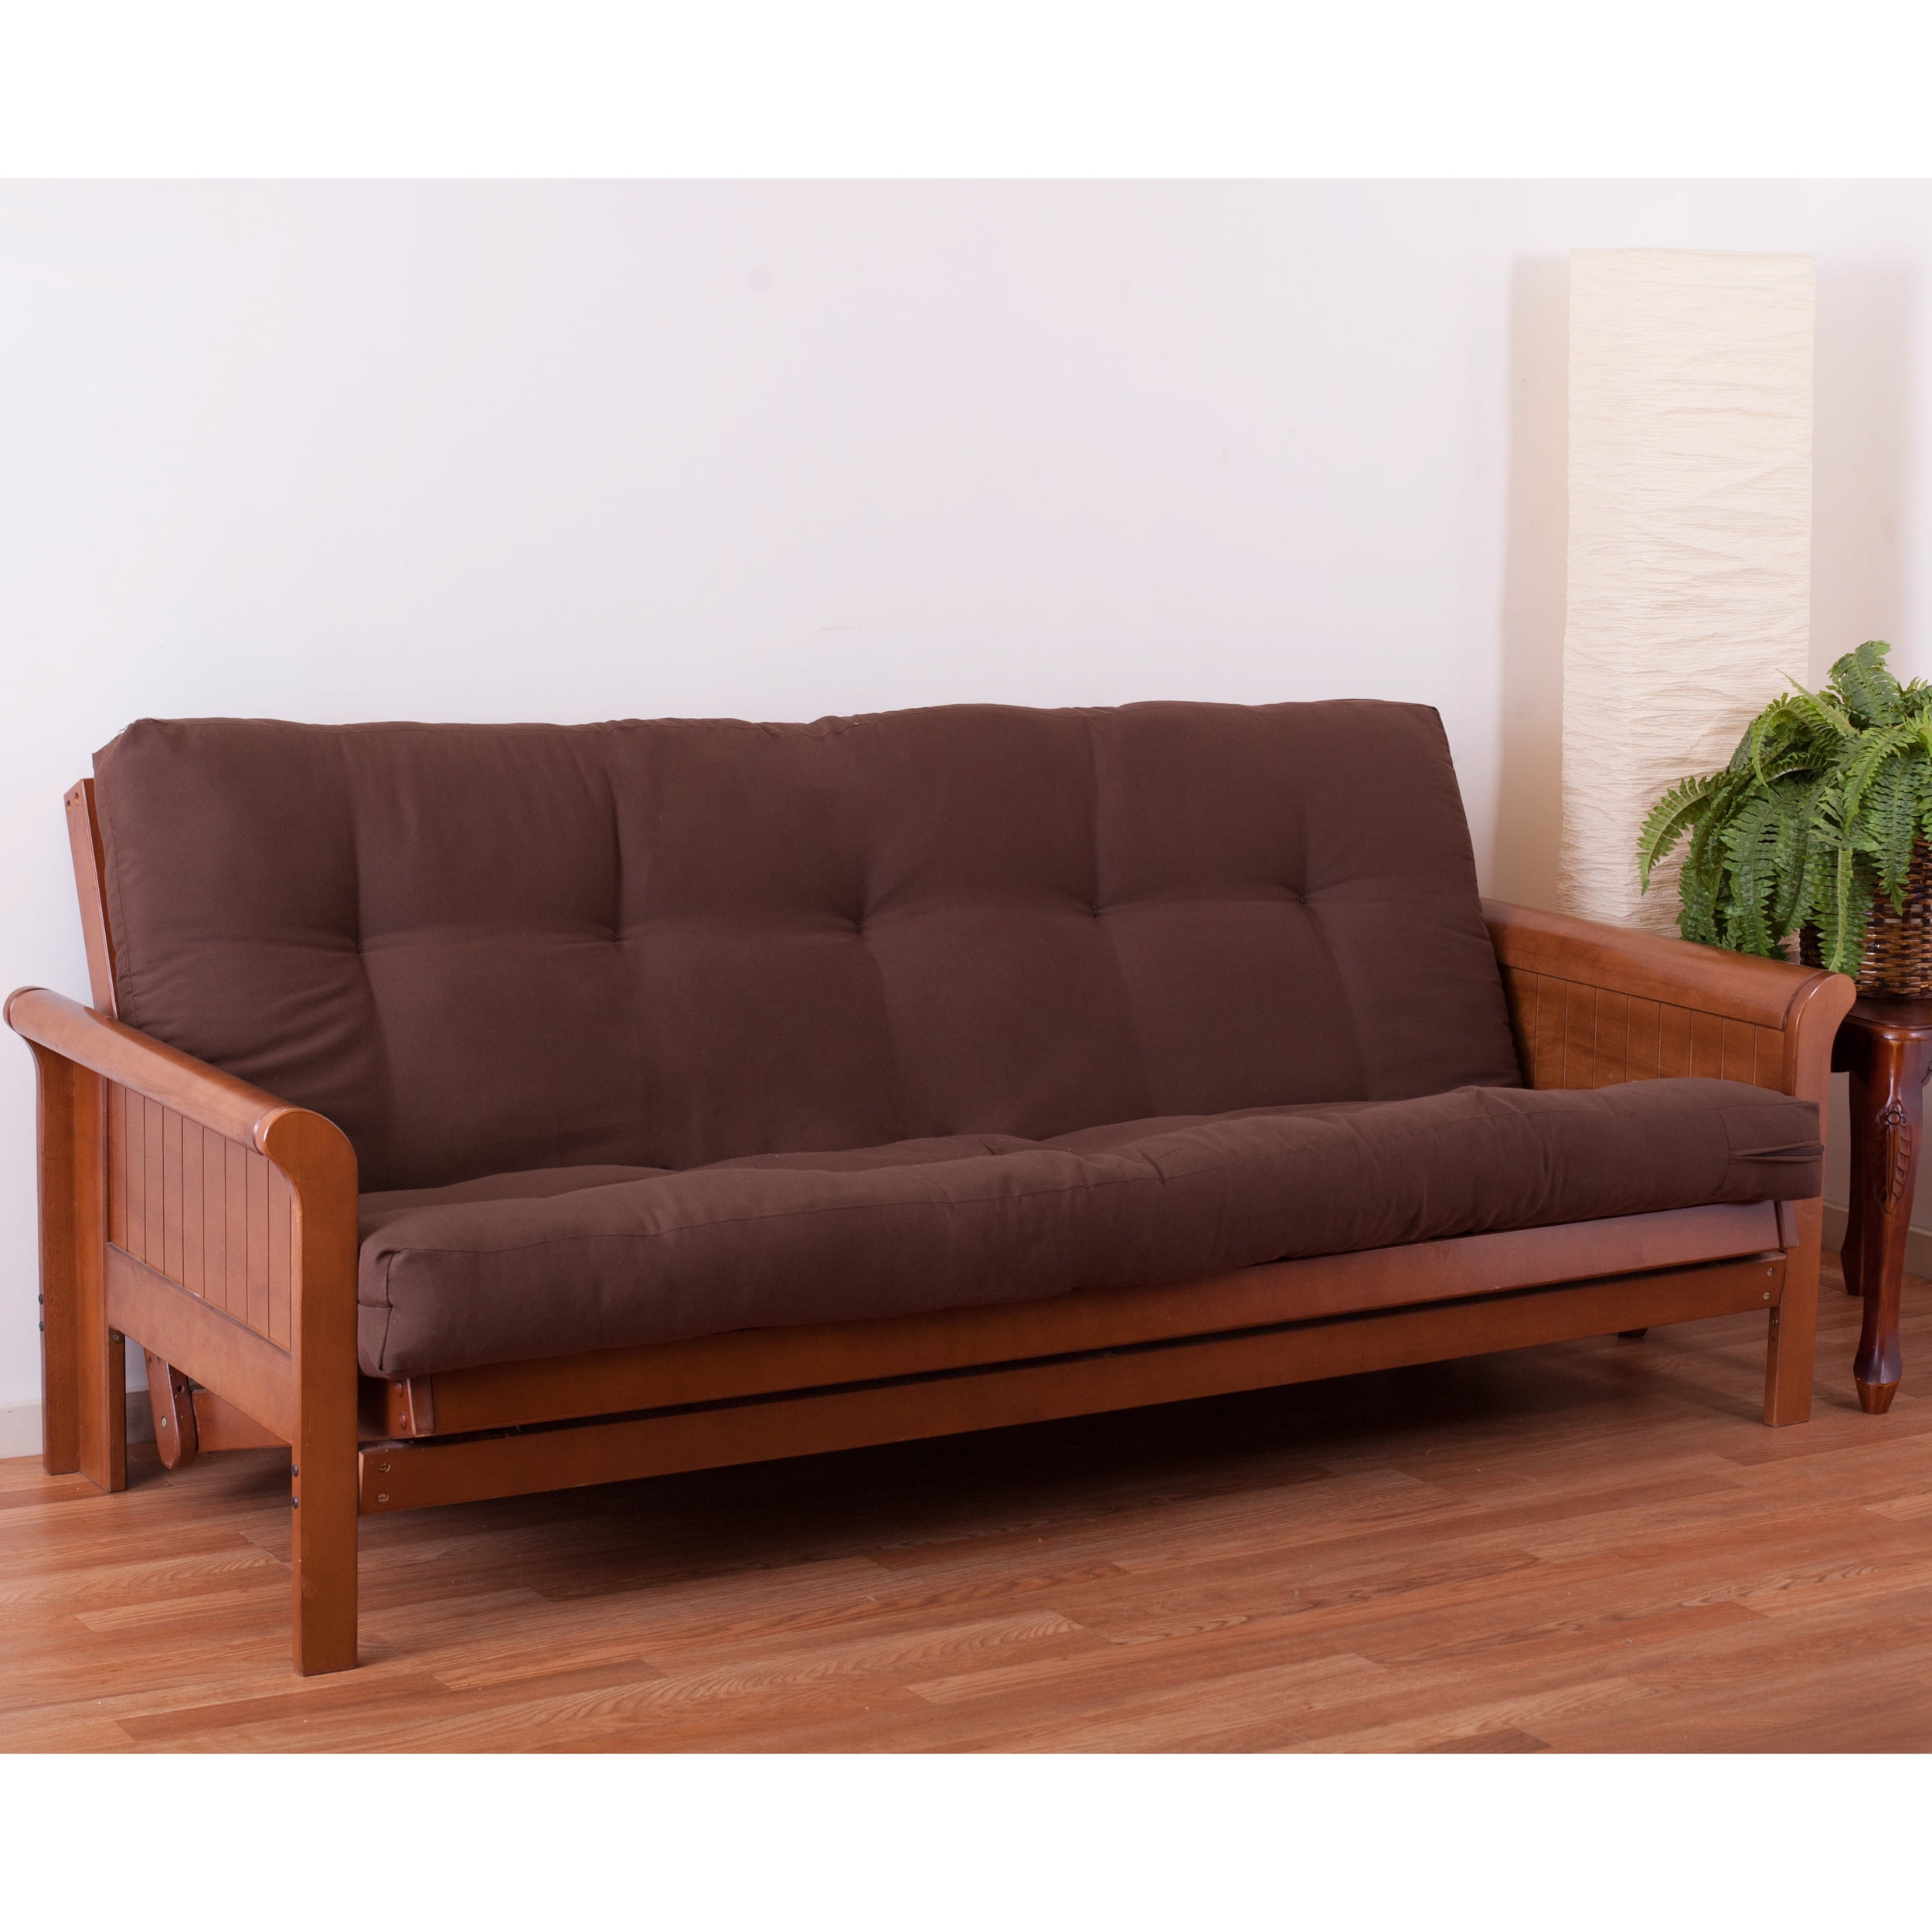 Picture of Blazing Needles 9605-TW-CH 5 in. Renewal Twill Full Size Futon Mattress, Chocolate